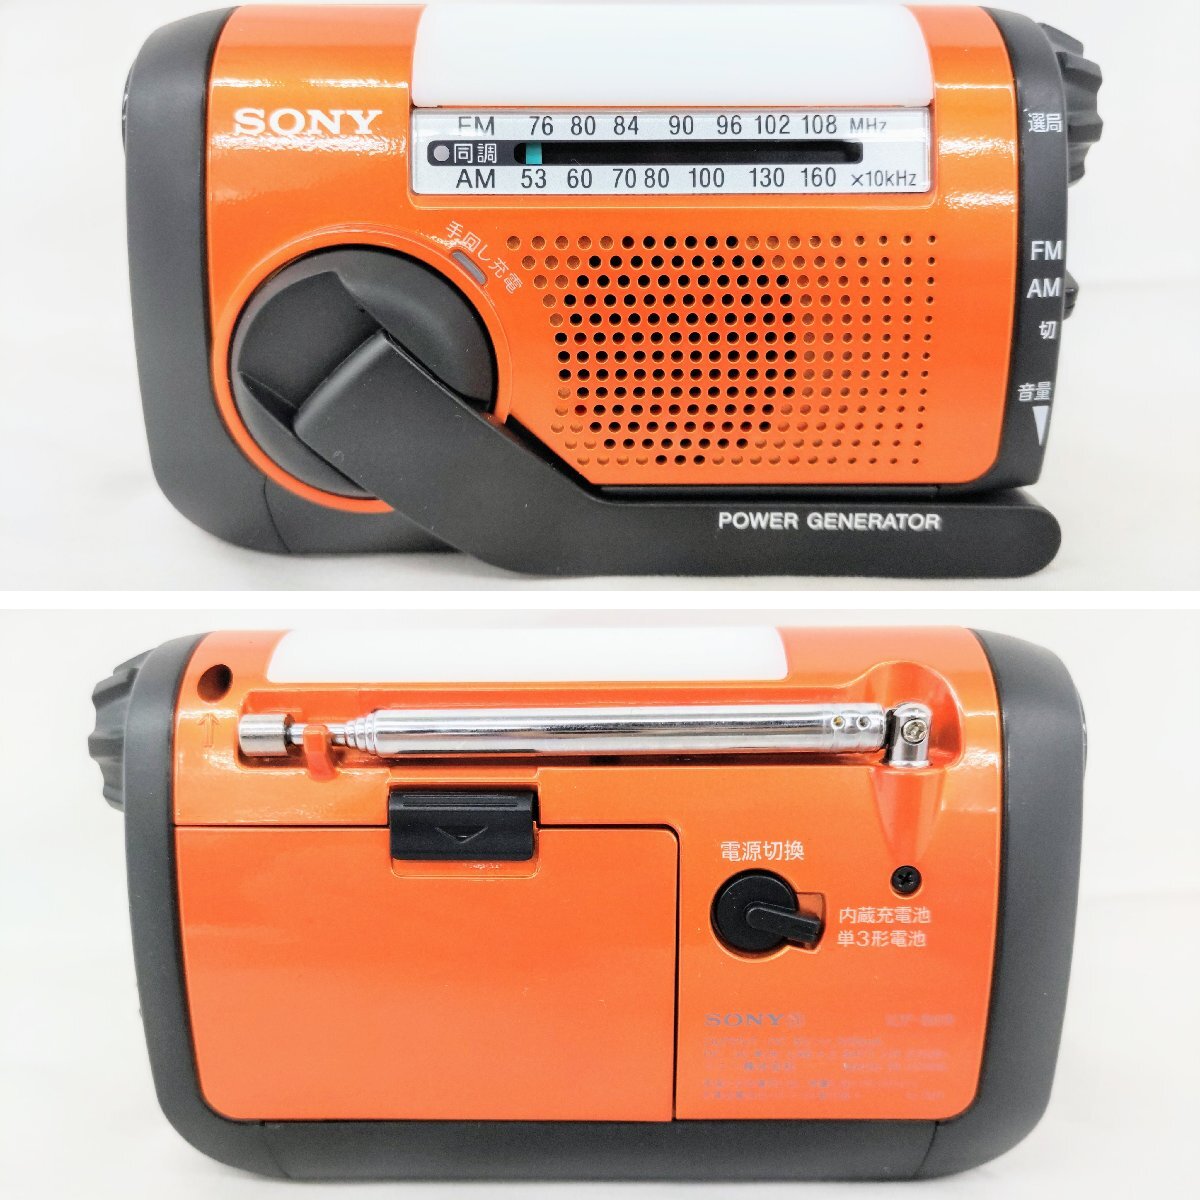 T1855 unused goods SONY Sony FM/AM radio hand turning charge radio ICF-B09 orange for emergency. pipe attaching mobile telephone charge LED light disaster prevention radio 